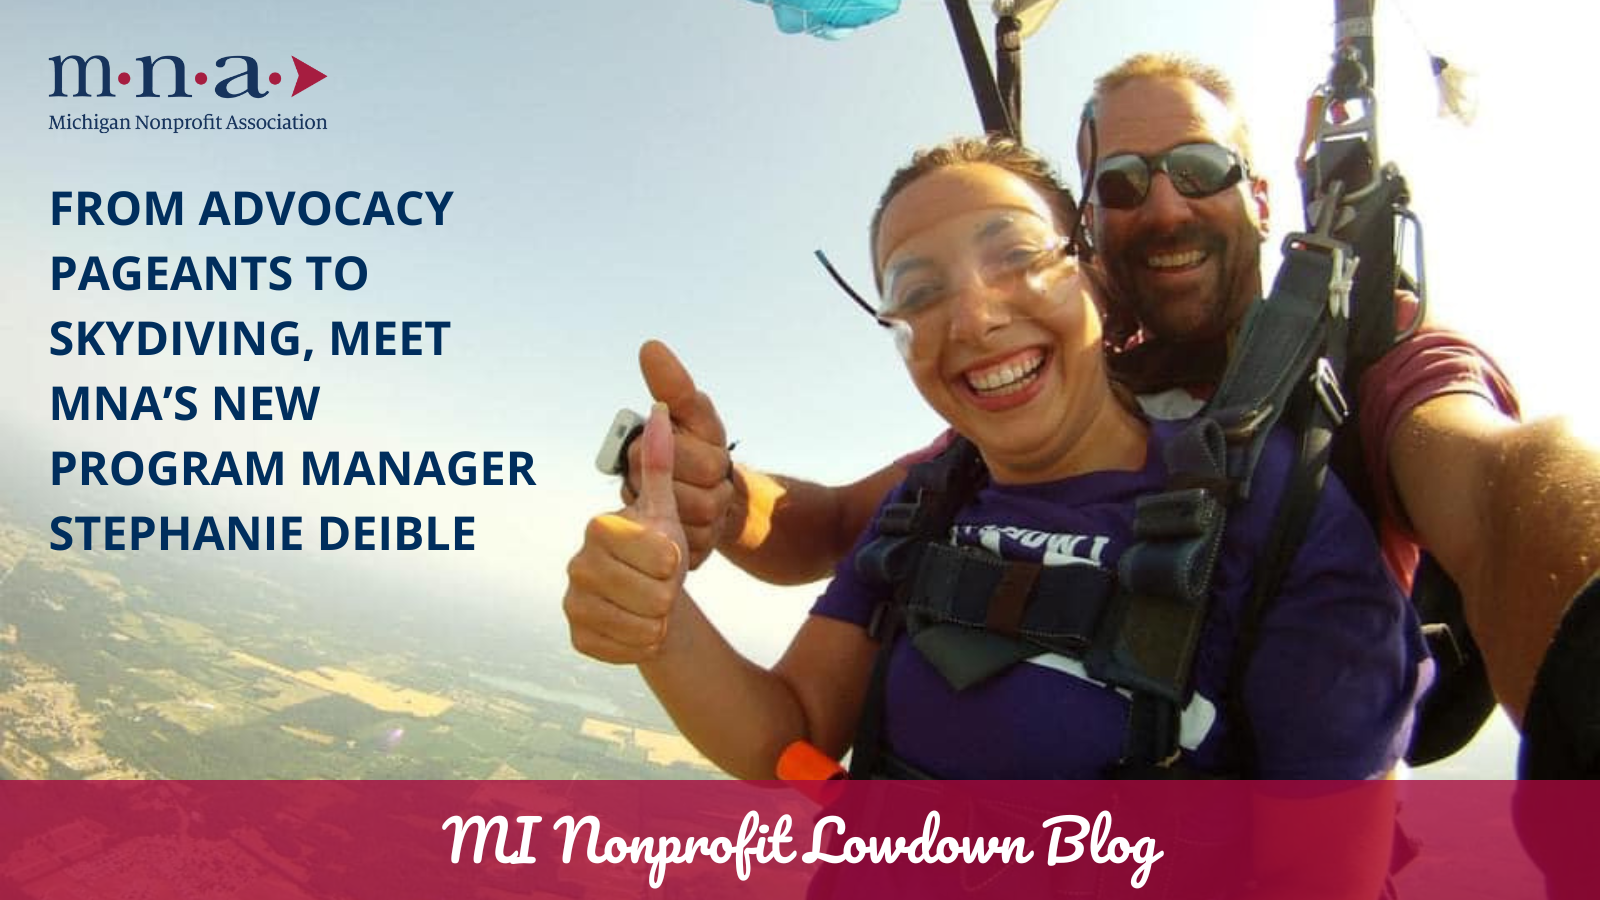 From Advocacy Pageants to Skydiving, Meet MNA’s New Program Manager Stephanie Deible